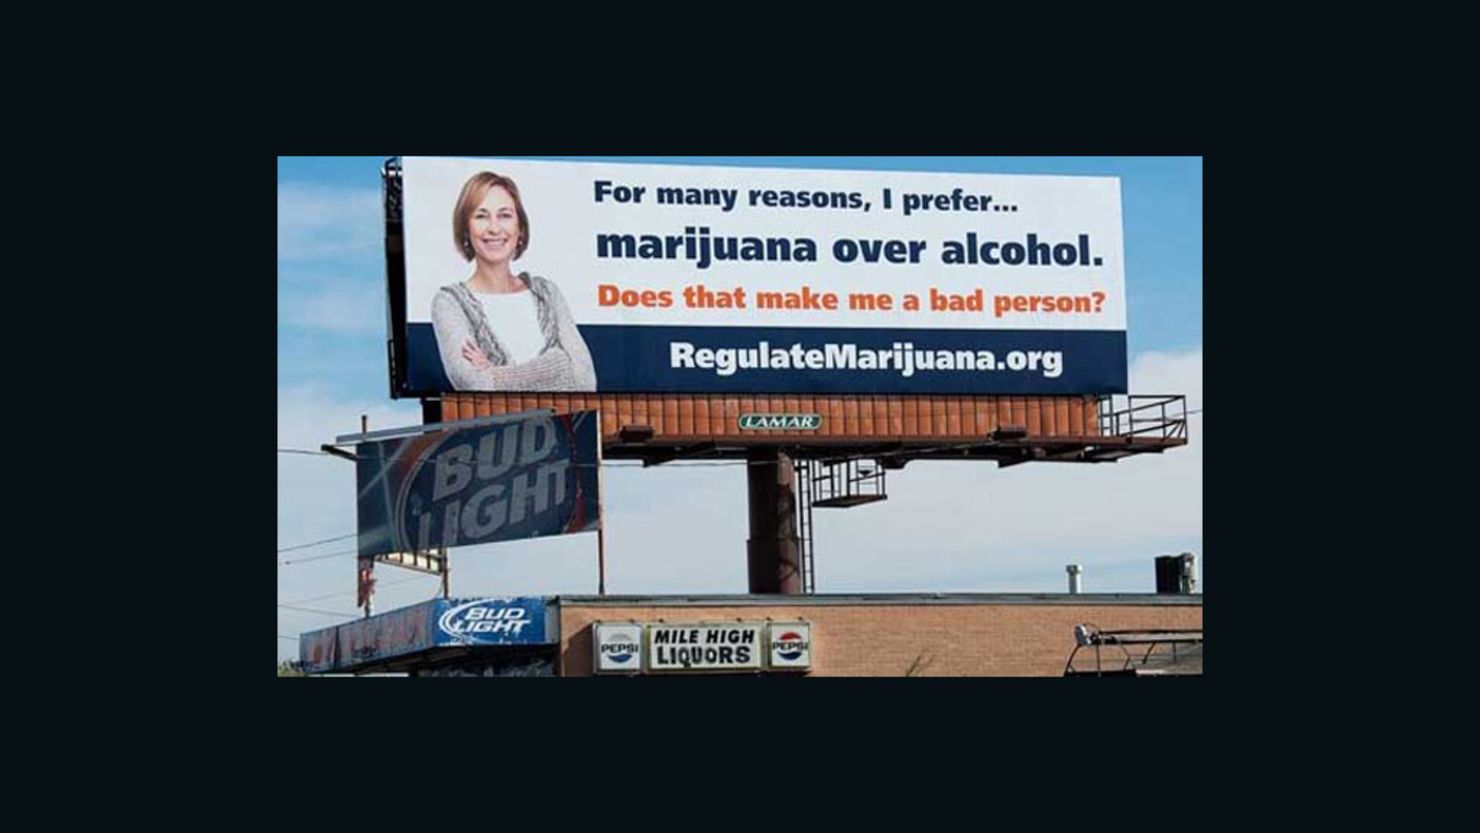 An advocacy group unveiled this billboard near Denver's Mile High stadium months before a ballot to legalize marijuana.